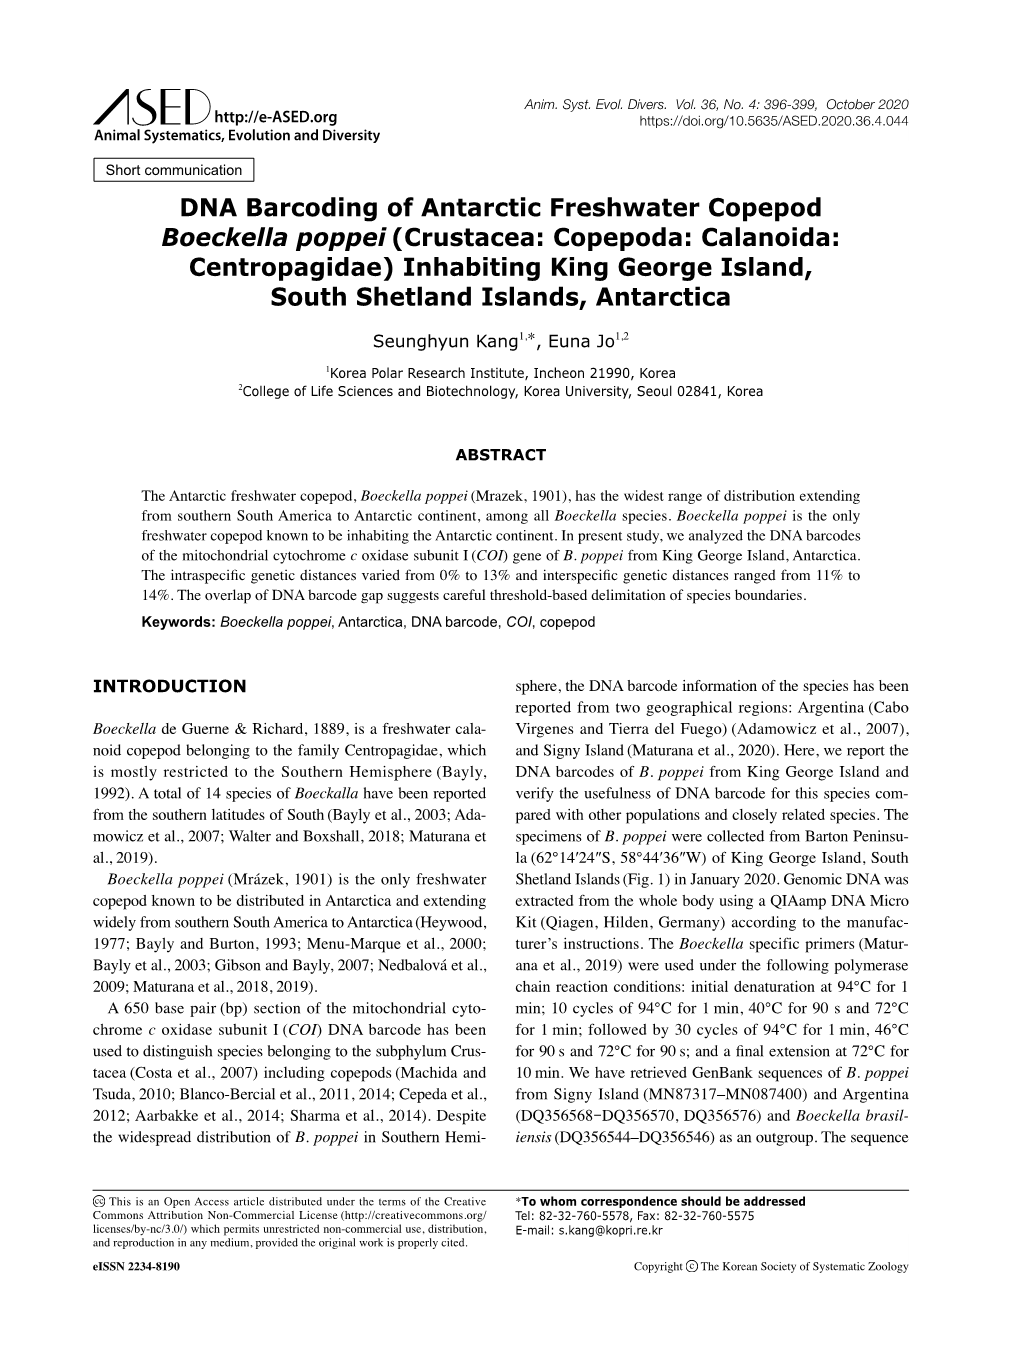 DNA Barcoding of Antarctic Freshwater Copepod